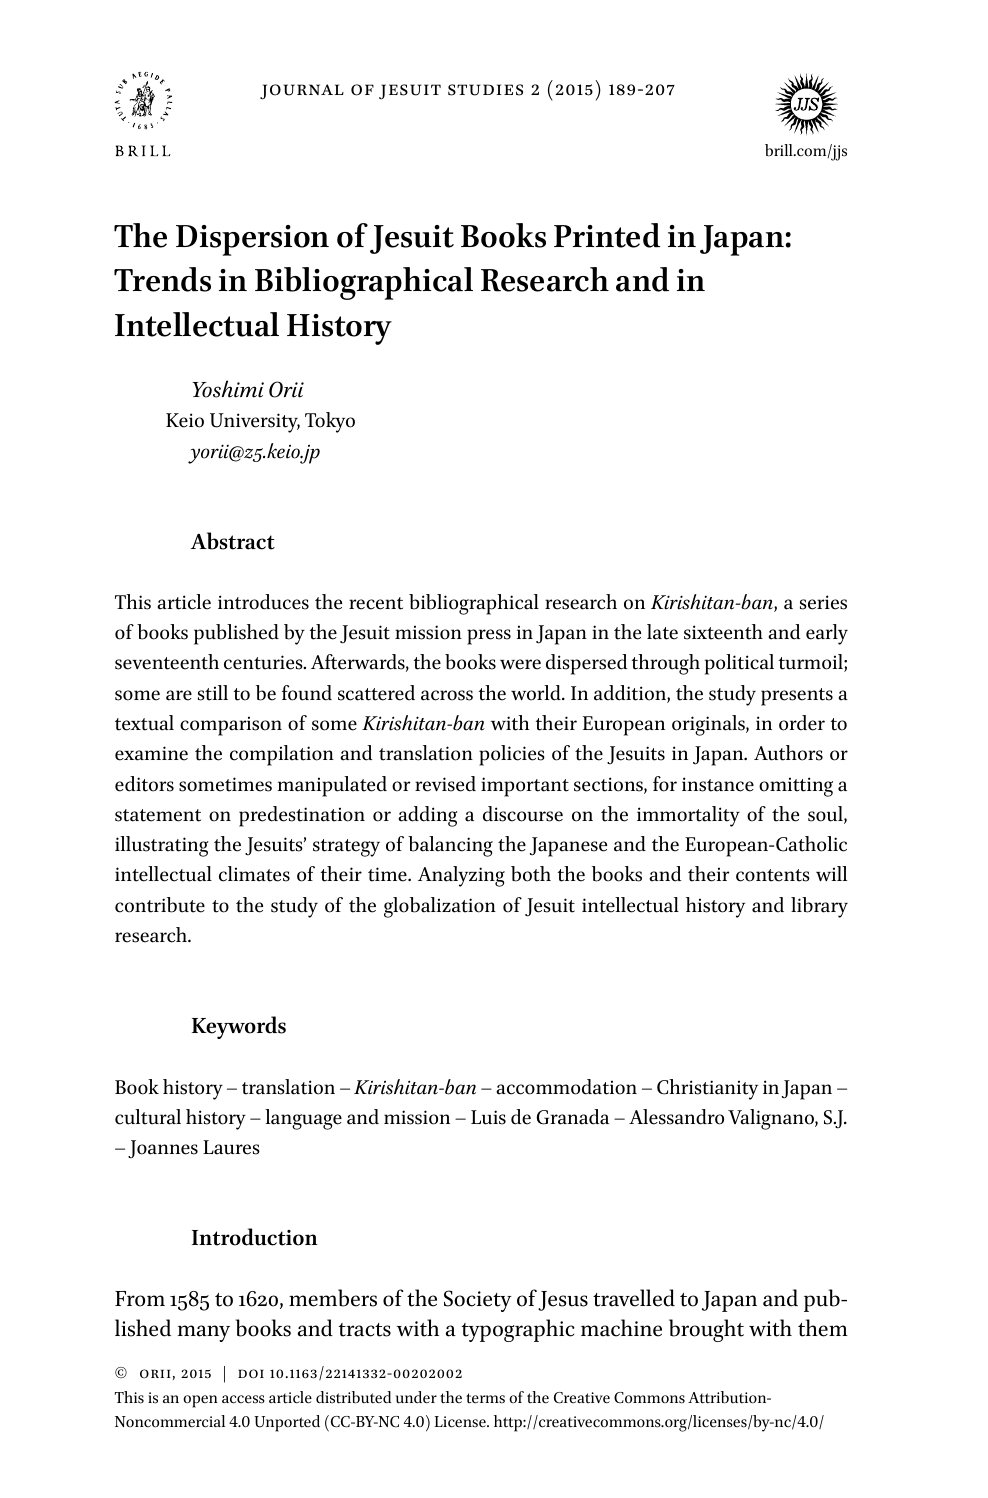 The Dispersion Of Jesuit Books Printed In Japan Trends In Bibliographical Research And In Intellectual History Topic Of Research Paper In Philosophy Ethics And Religion Download Scholarly Article Pdf And Read